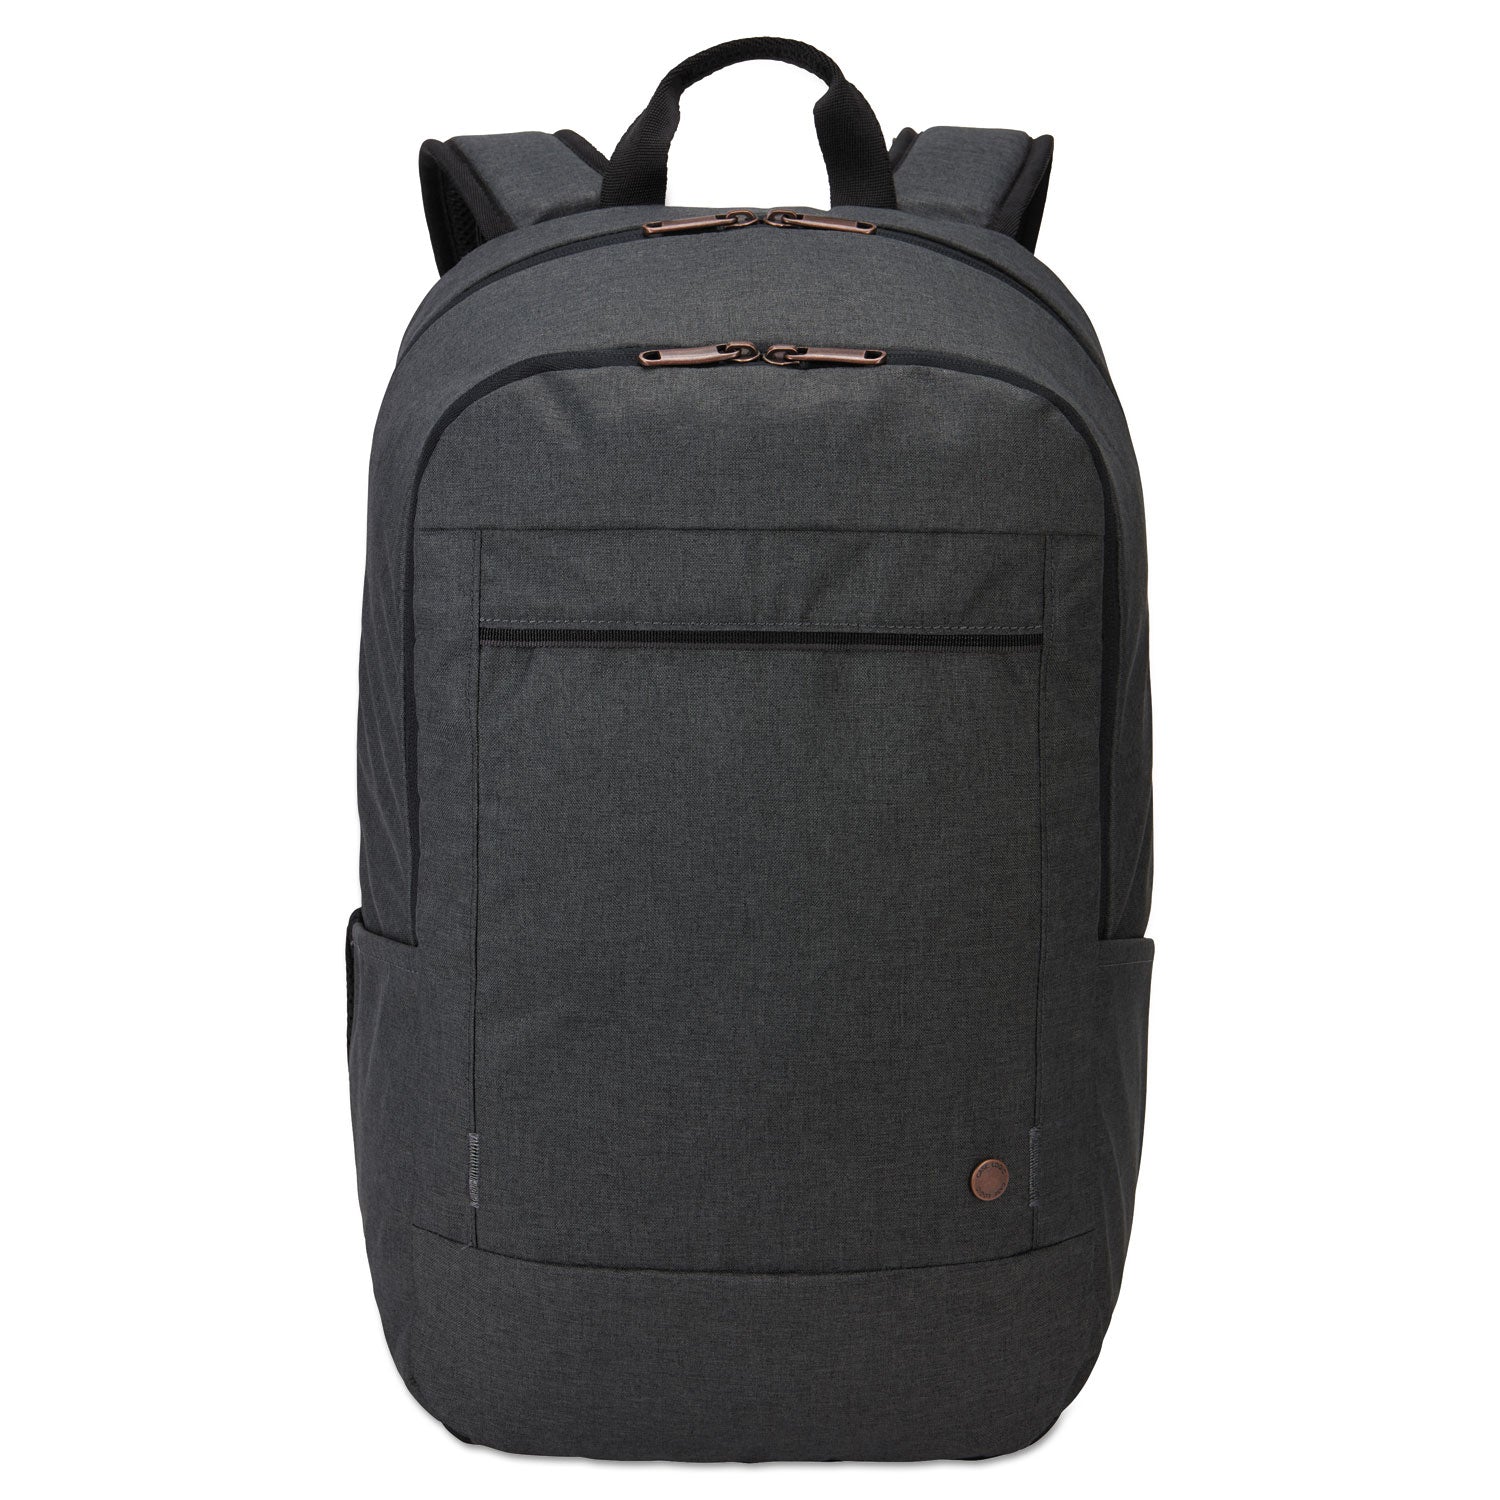 era-laptop-backpack-fits-devices-up-to-156-polyester-91-x-11-x-169-gray_clg3204192 - 1